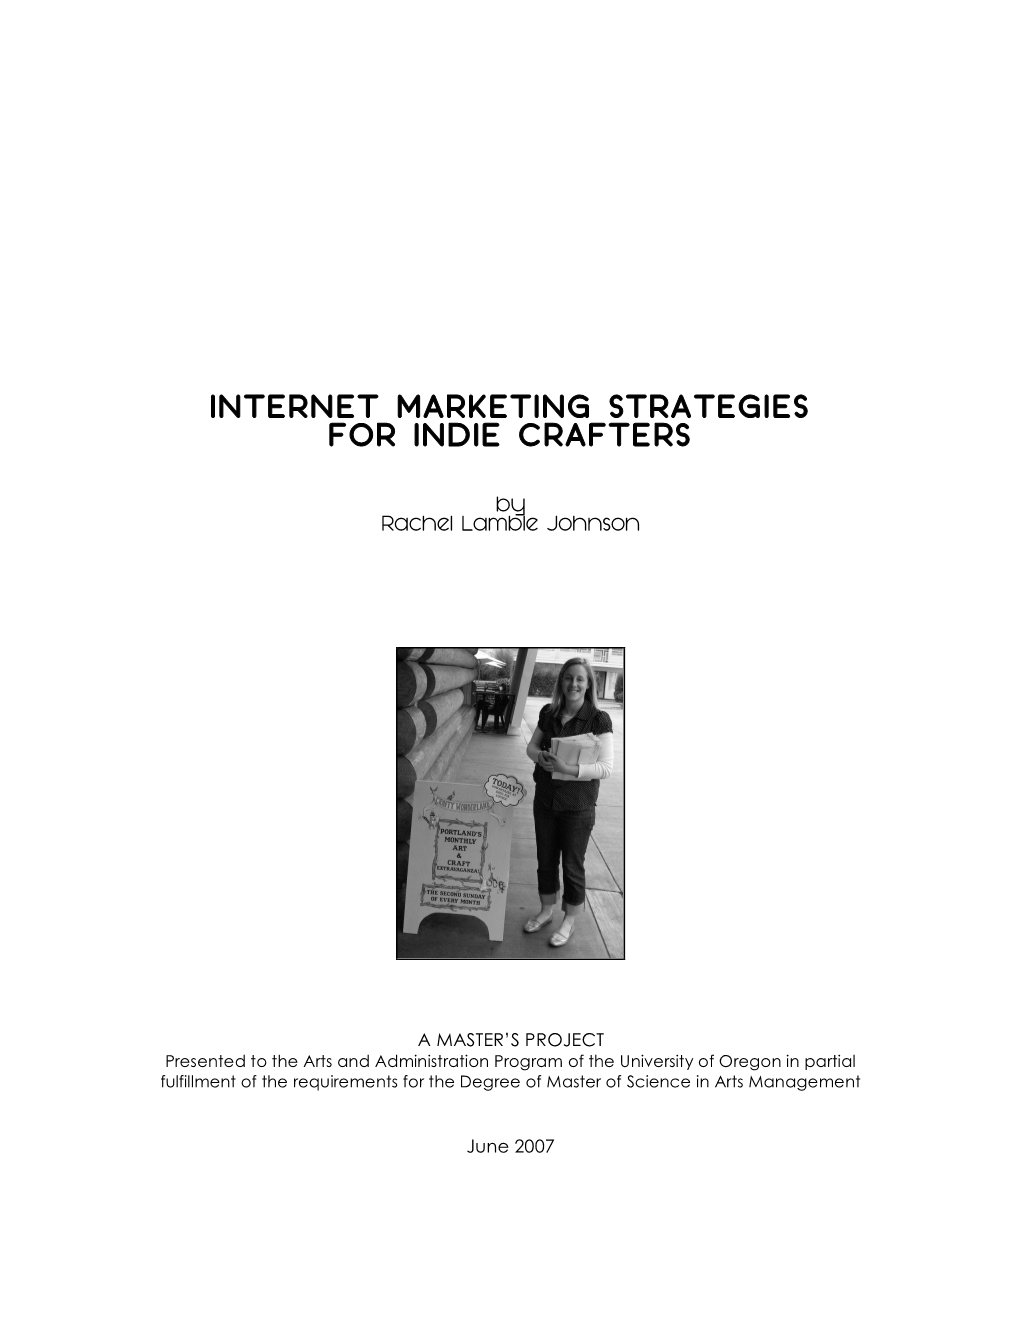 Internet Marketing Strategies for Indie Crafters